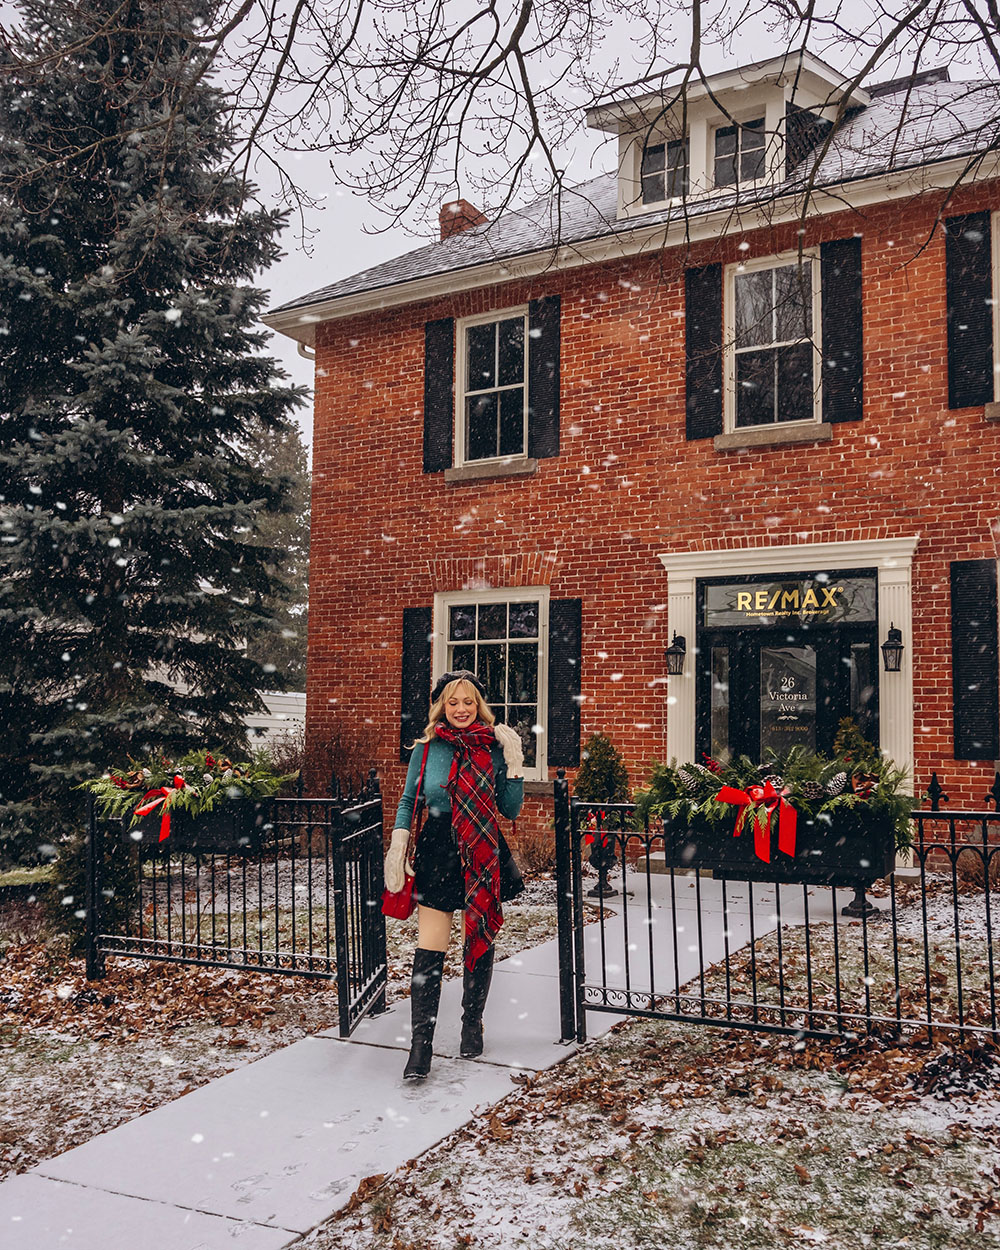 Ever wish you could step into a Hallmark Christmas movie? These 13 magical Christmas towns in Ontario will have you feeling just like you did! Pack your bags, load up the car, and get ready for the ultimate Christmas getaway - a road trip through Ontario's Christmas towns! Pictured here: Brockville